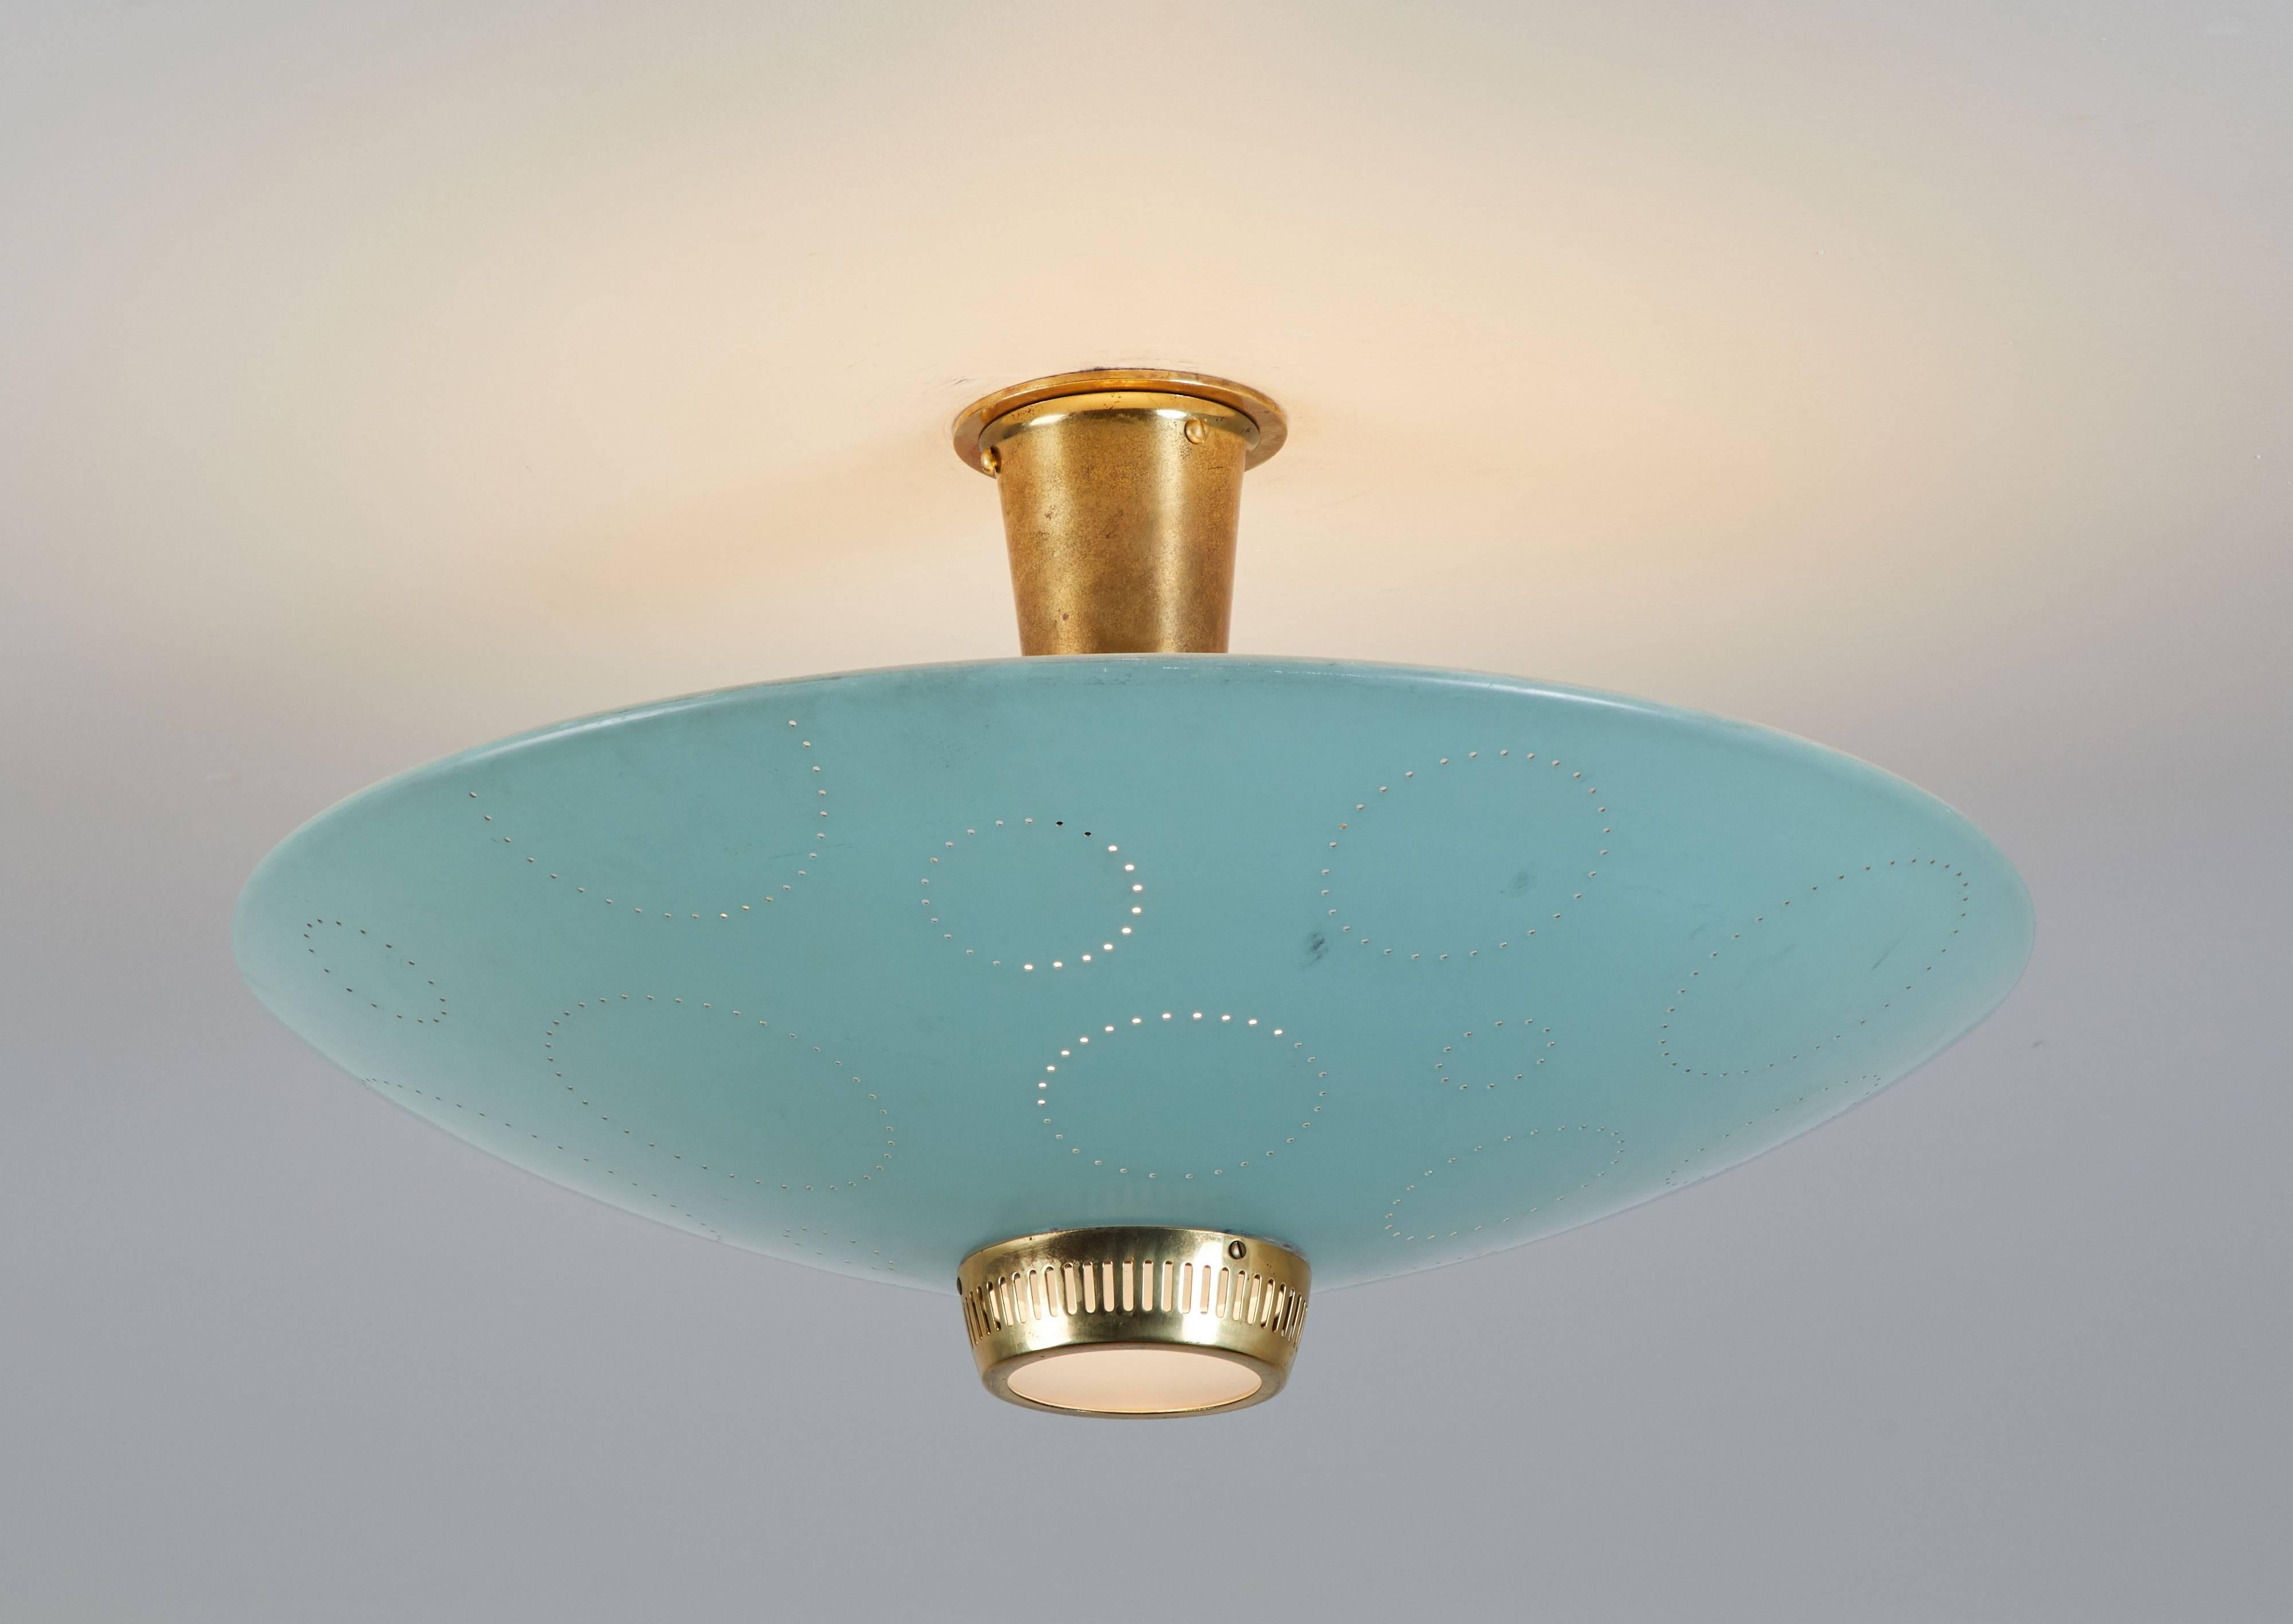 Flush mount ceiling light manufactured by Belmag, Zurich Switzerland, circa 1950s. Disc shaped enameled metal reflector with circular perforations of different sizes and a small round brass diffuser. Original colored enamel. Custom brass backplate.